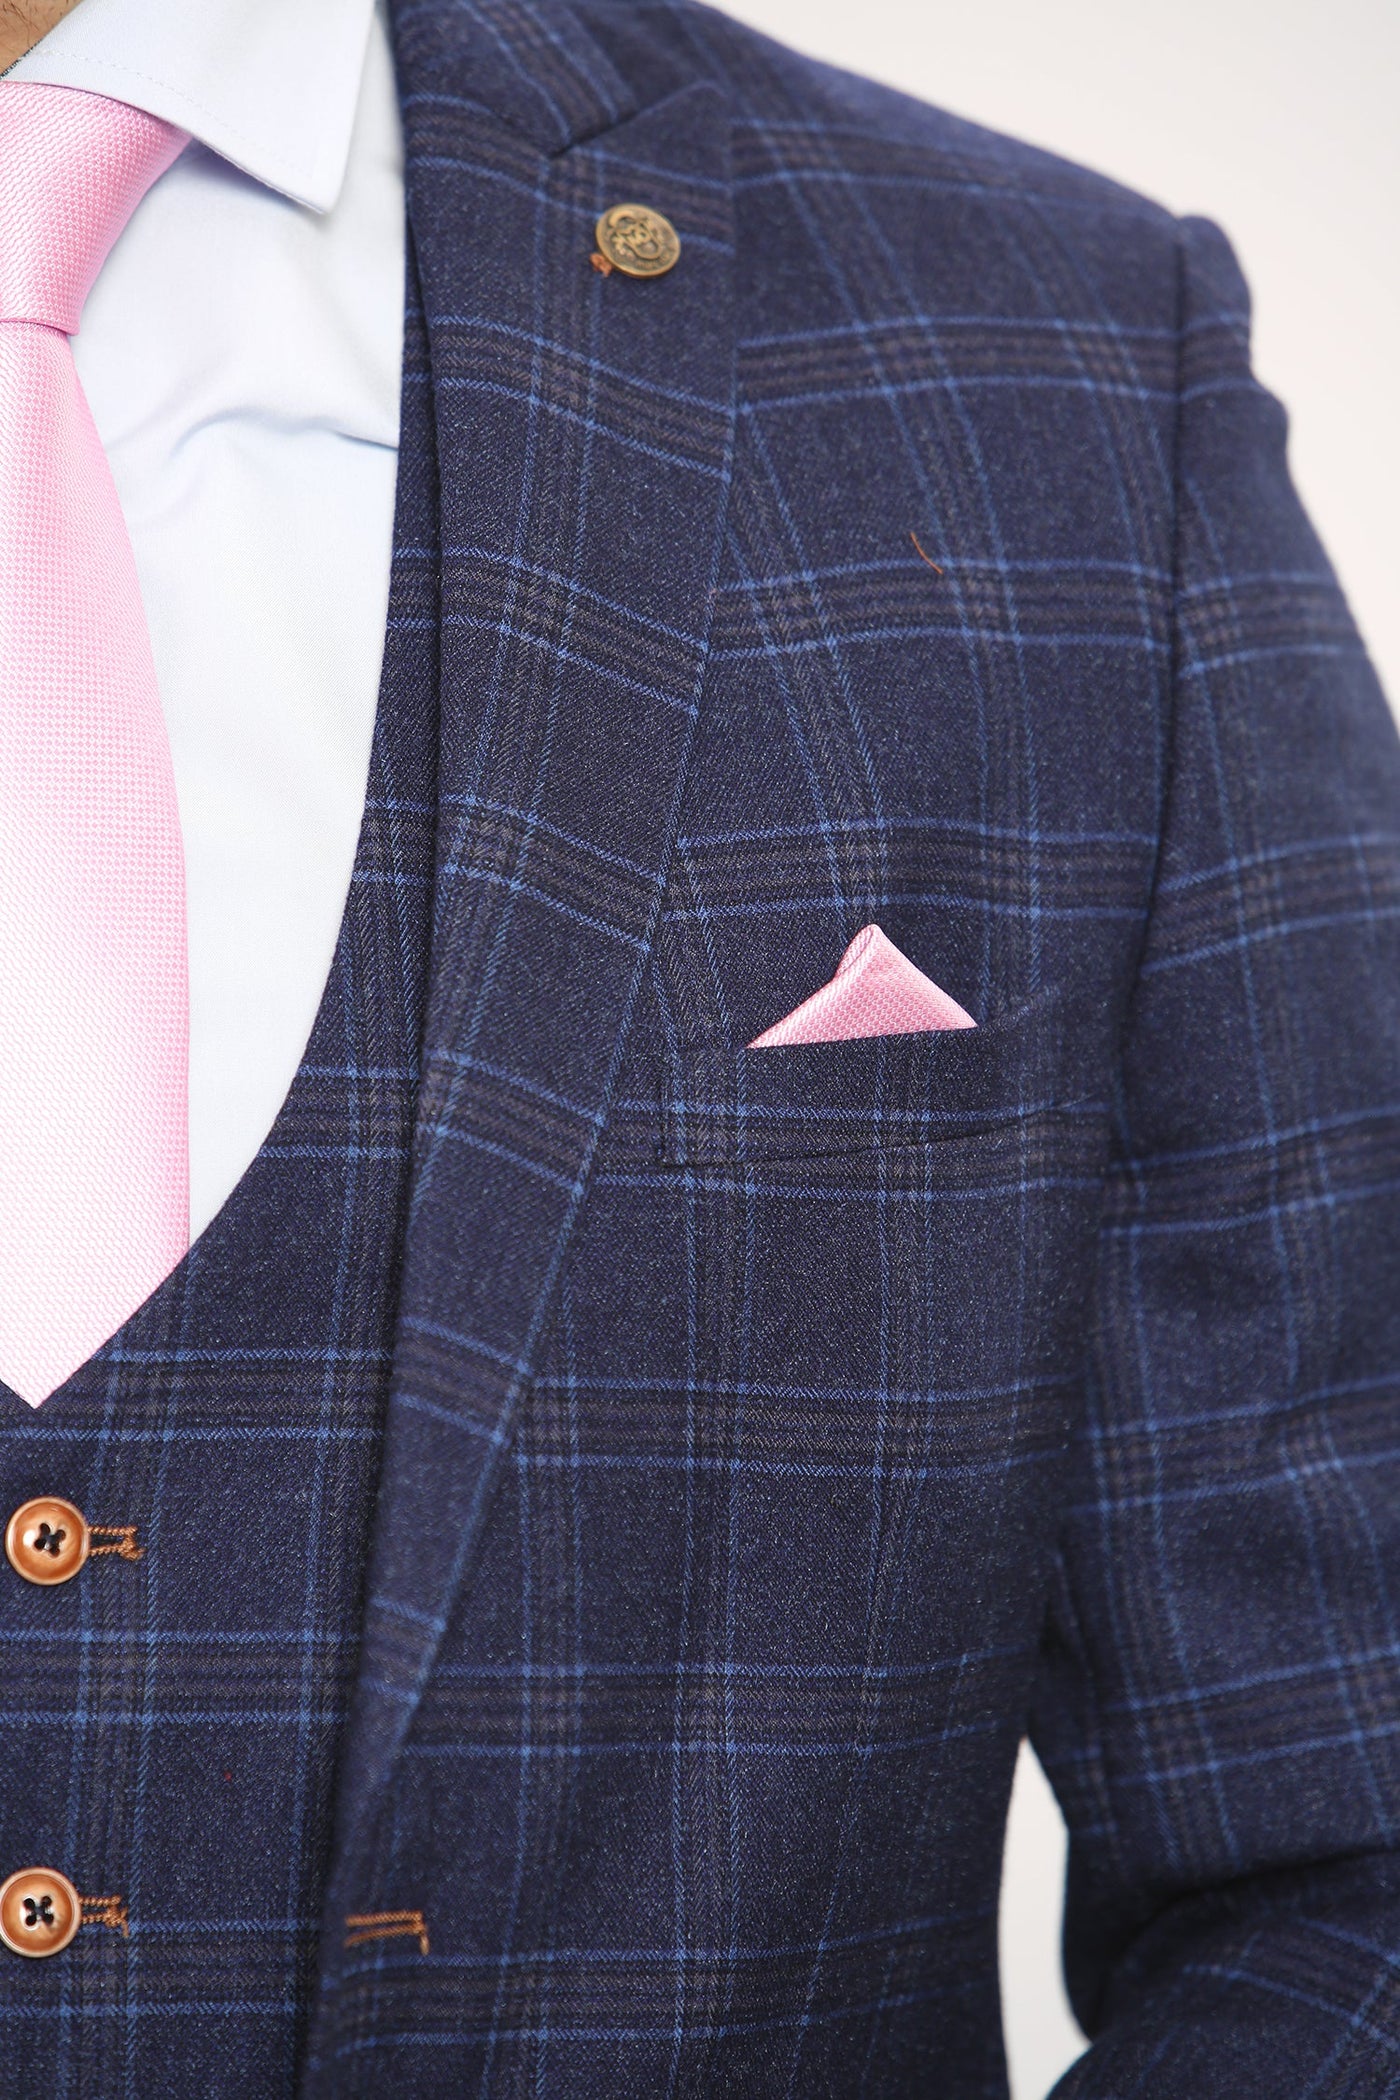 CHIGWELL - Blue Tweed Check Three Piece Suit